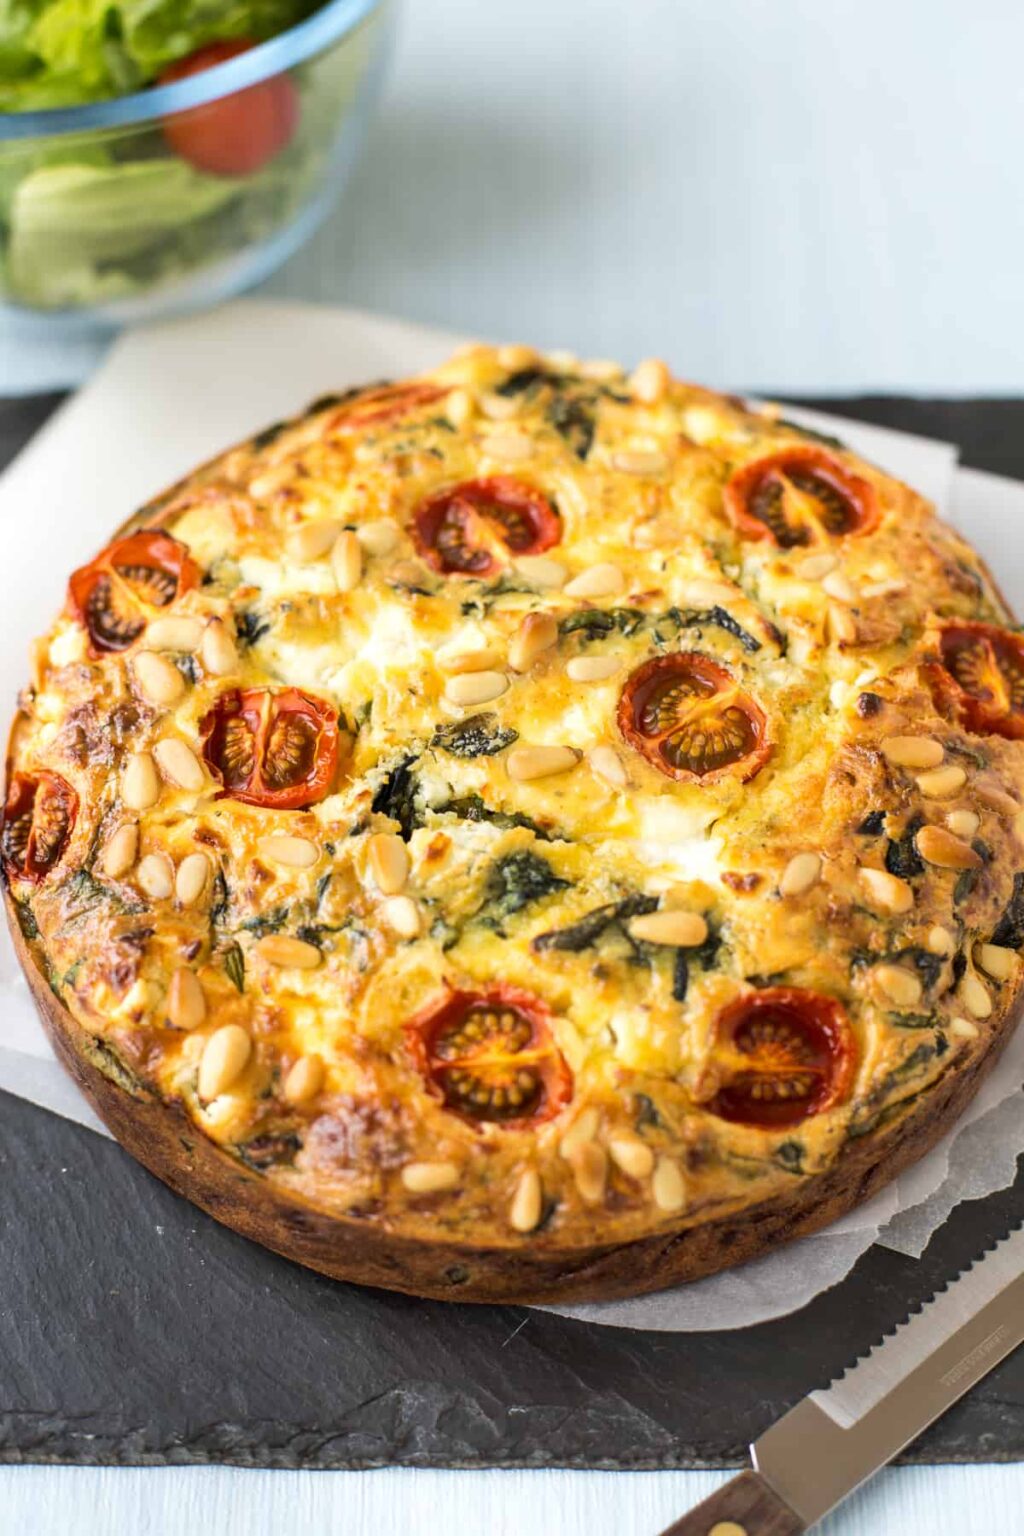 Spinach and Goat's Cheese Self-Crusting Quiche - Easy Cheesy Vegetarian